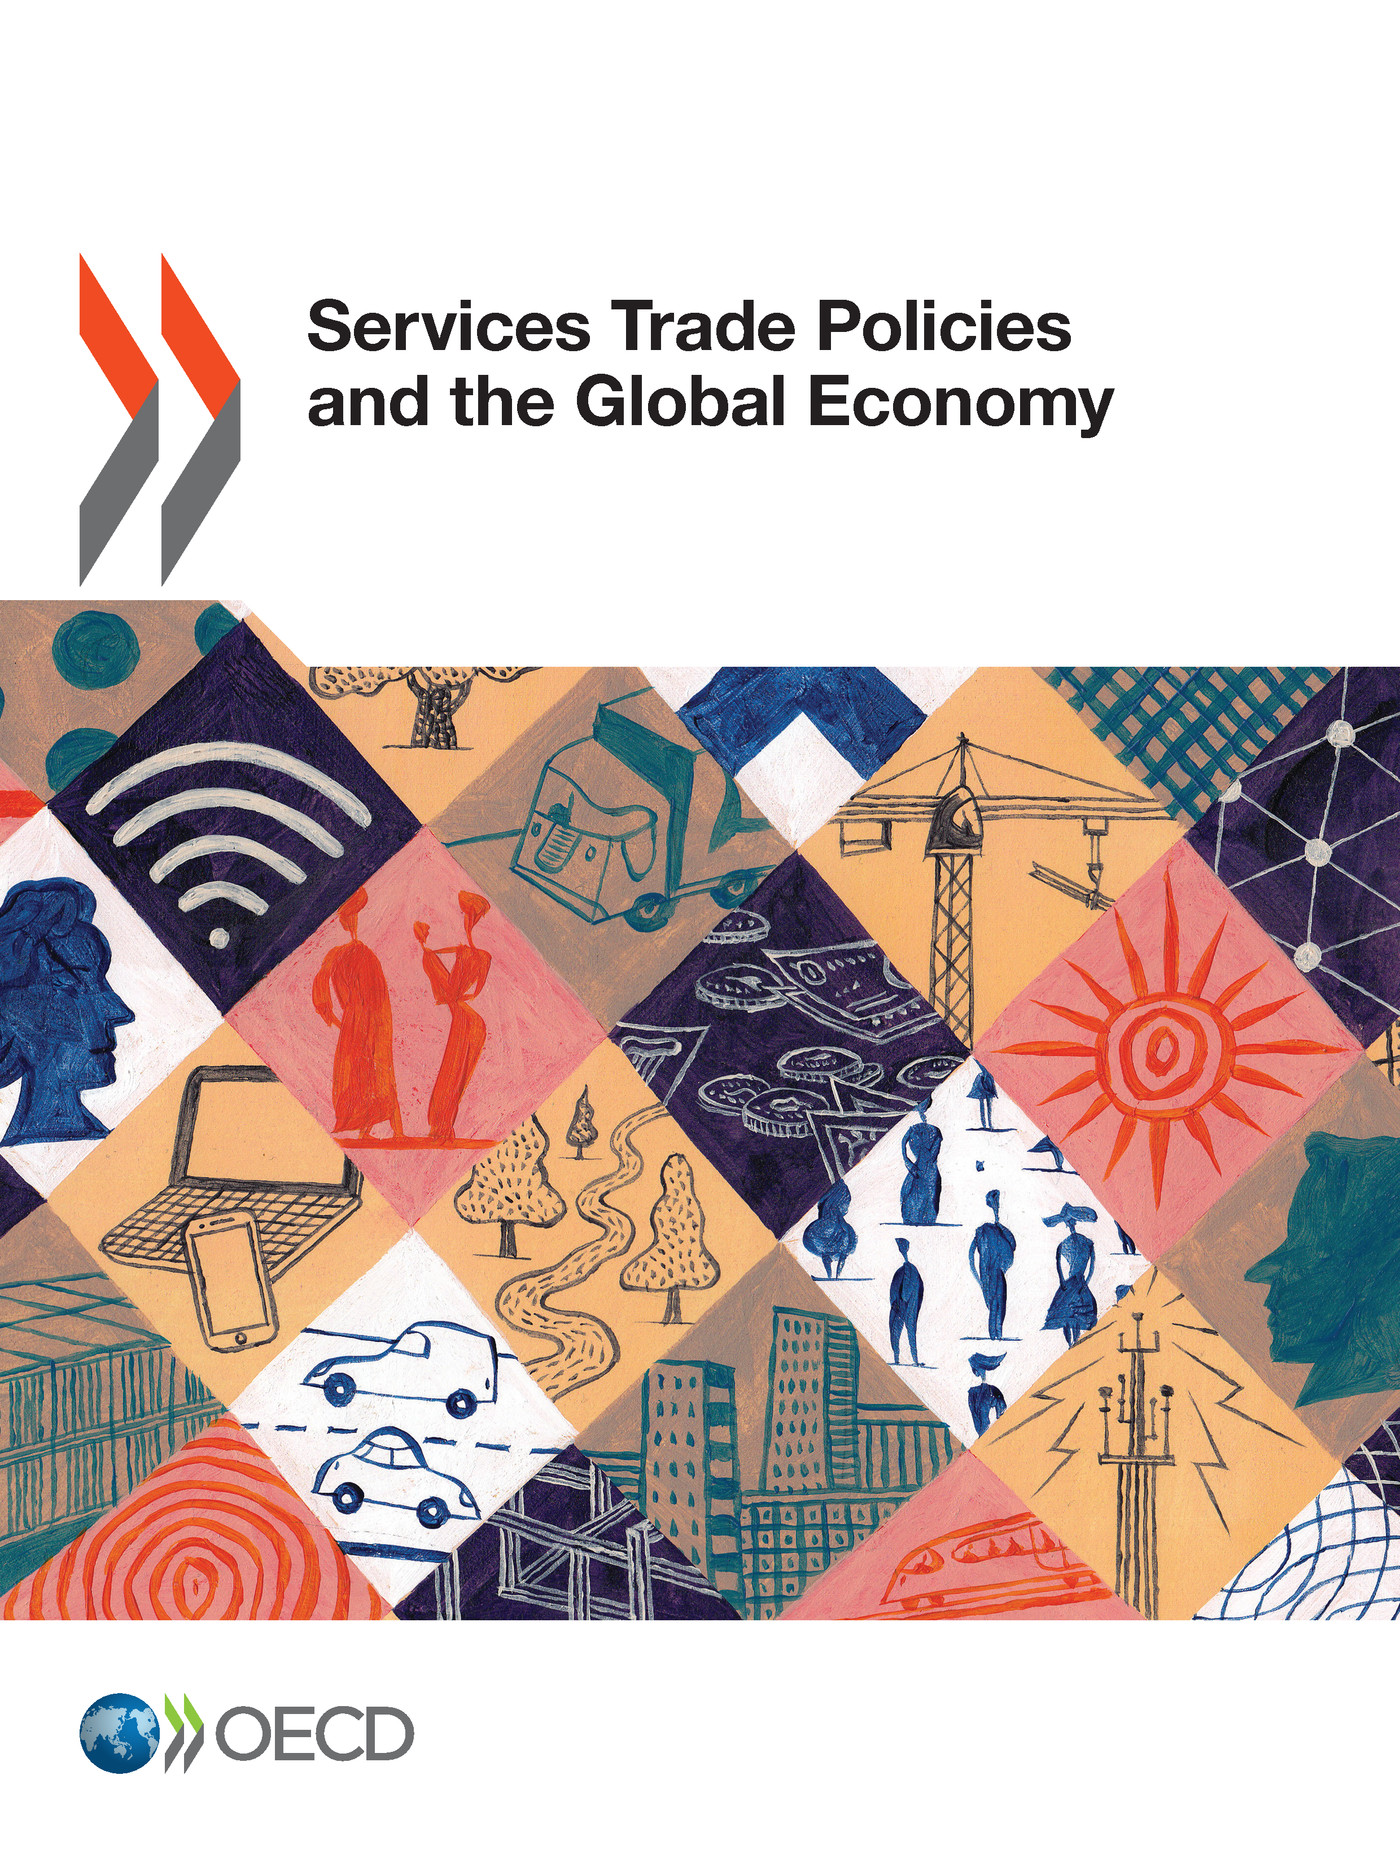 Services Trade Policies and the Global Economy -  Collectif - OCDE / OECD